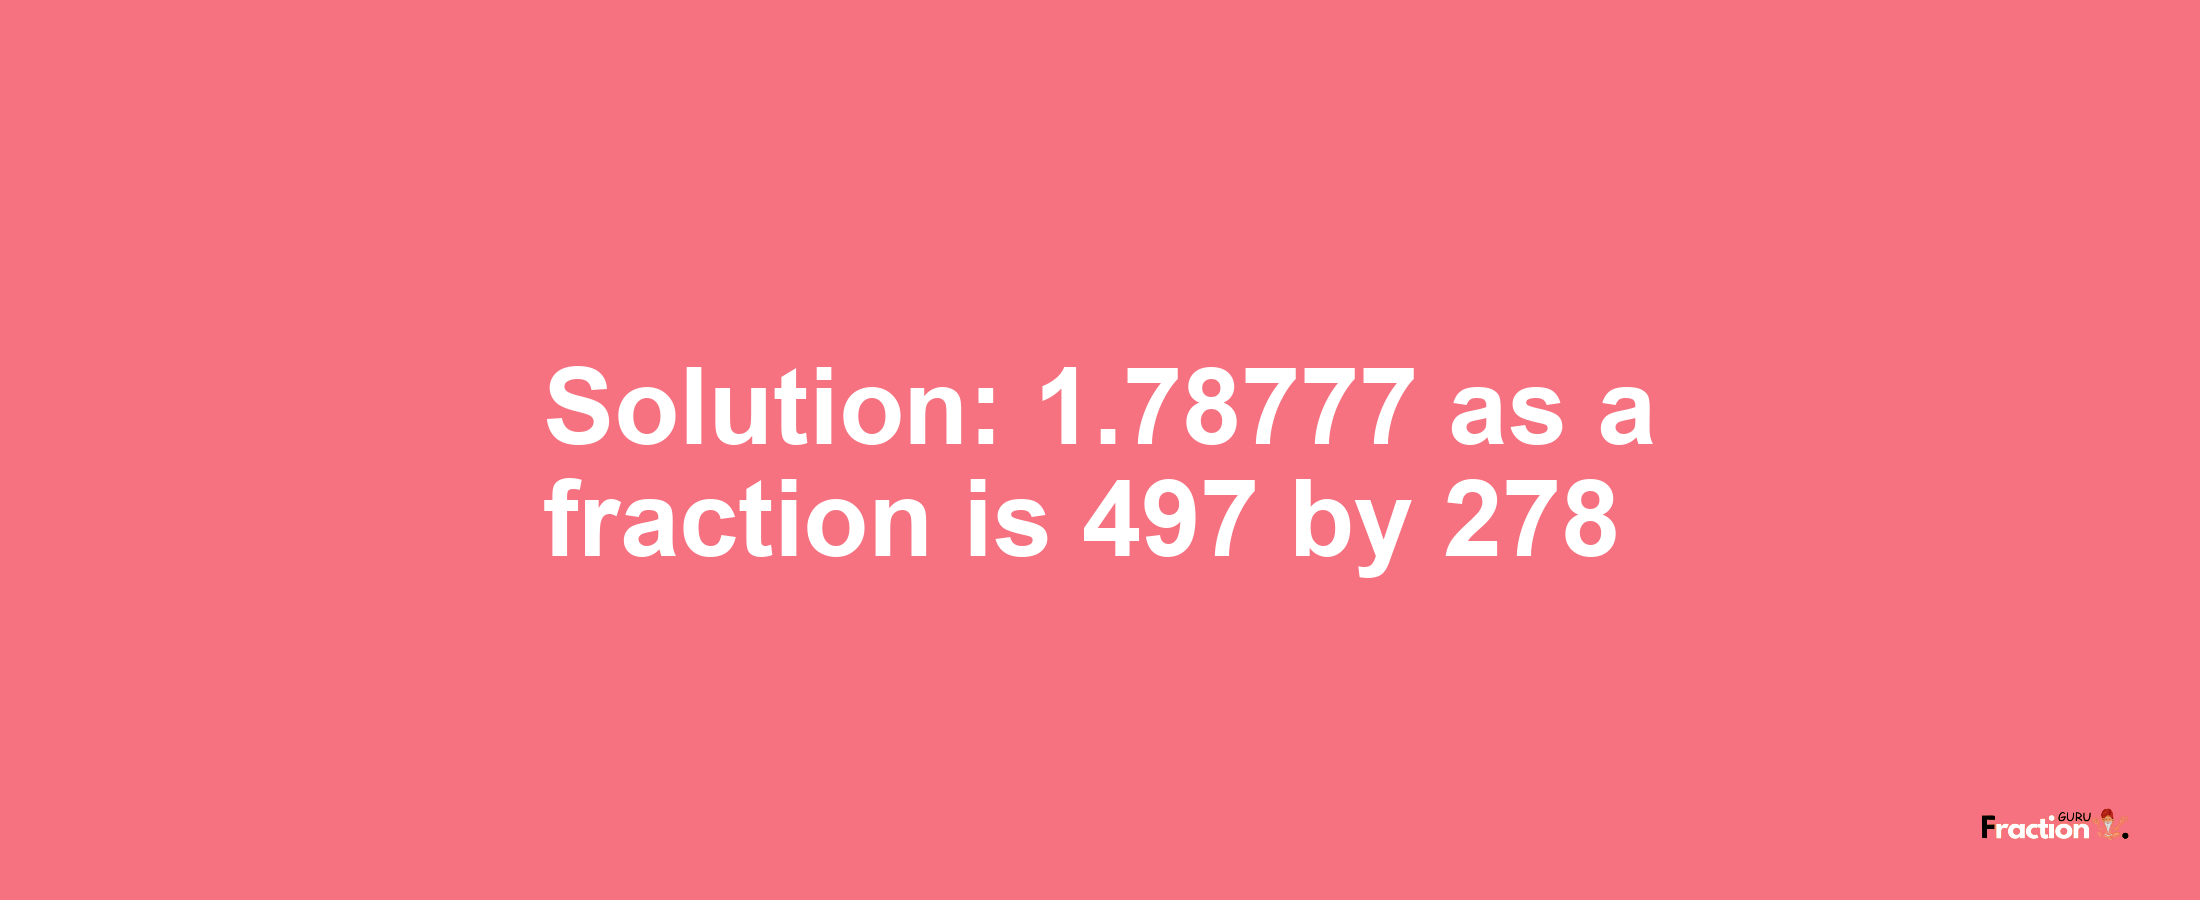 Solution:1.78777 as a fraction is 497/278